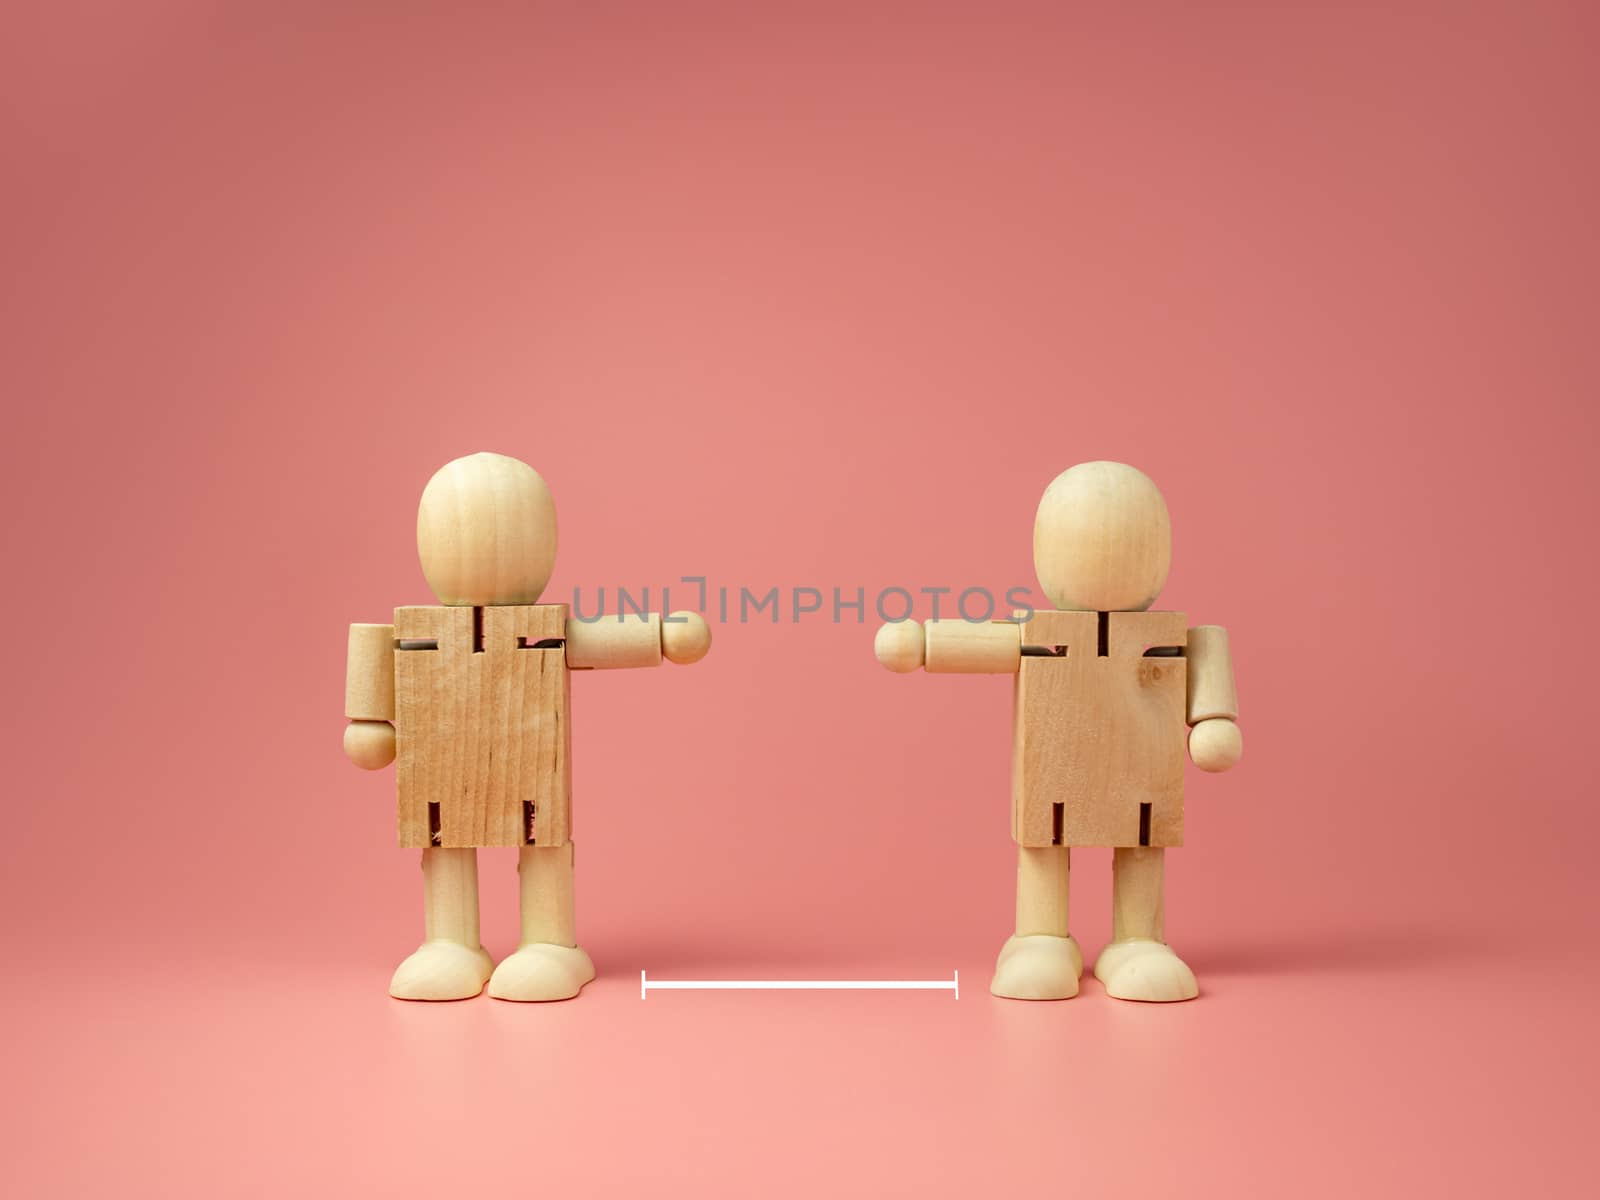 Two wooden doll on pink background. 
keep distance concept.
preventive measures.
infection control.